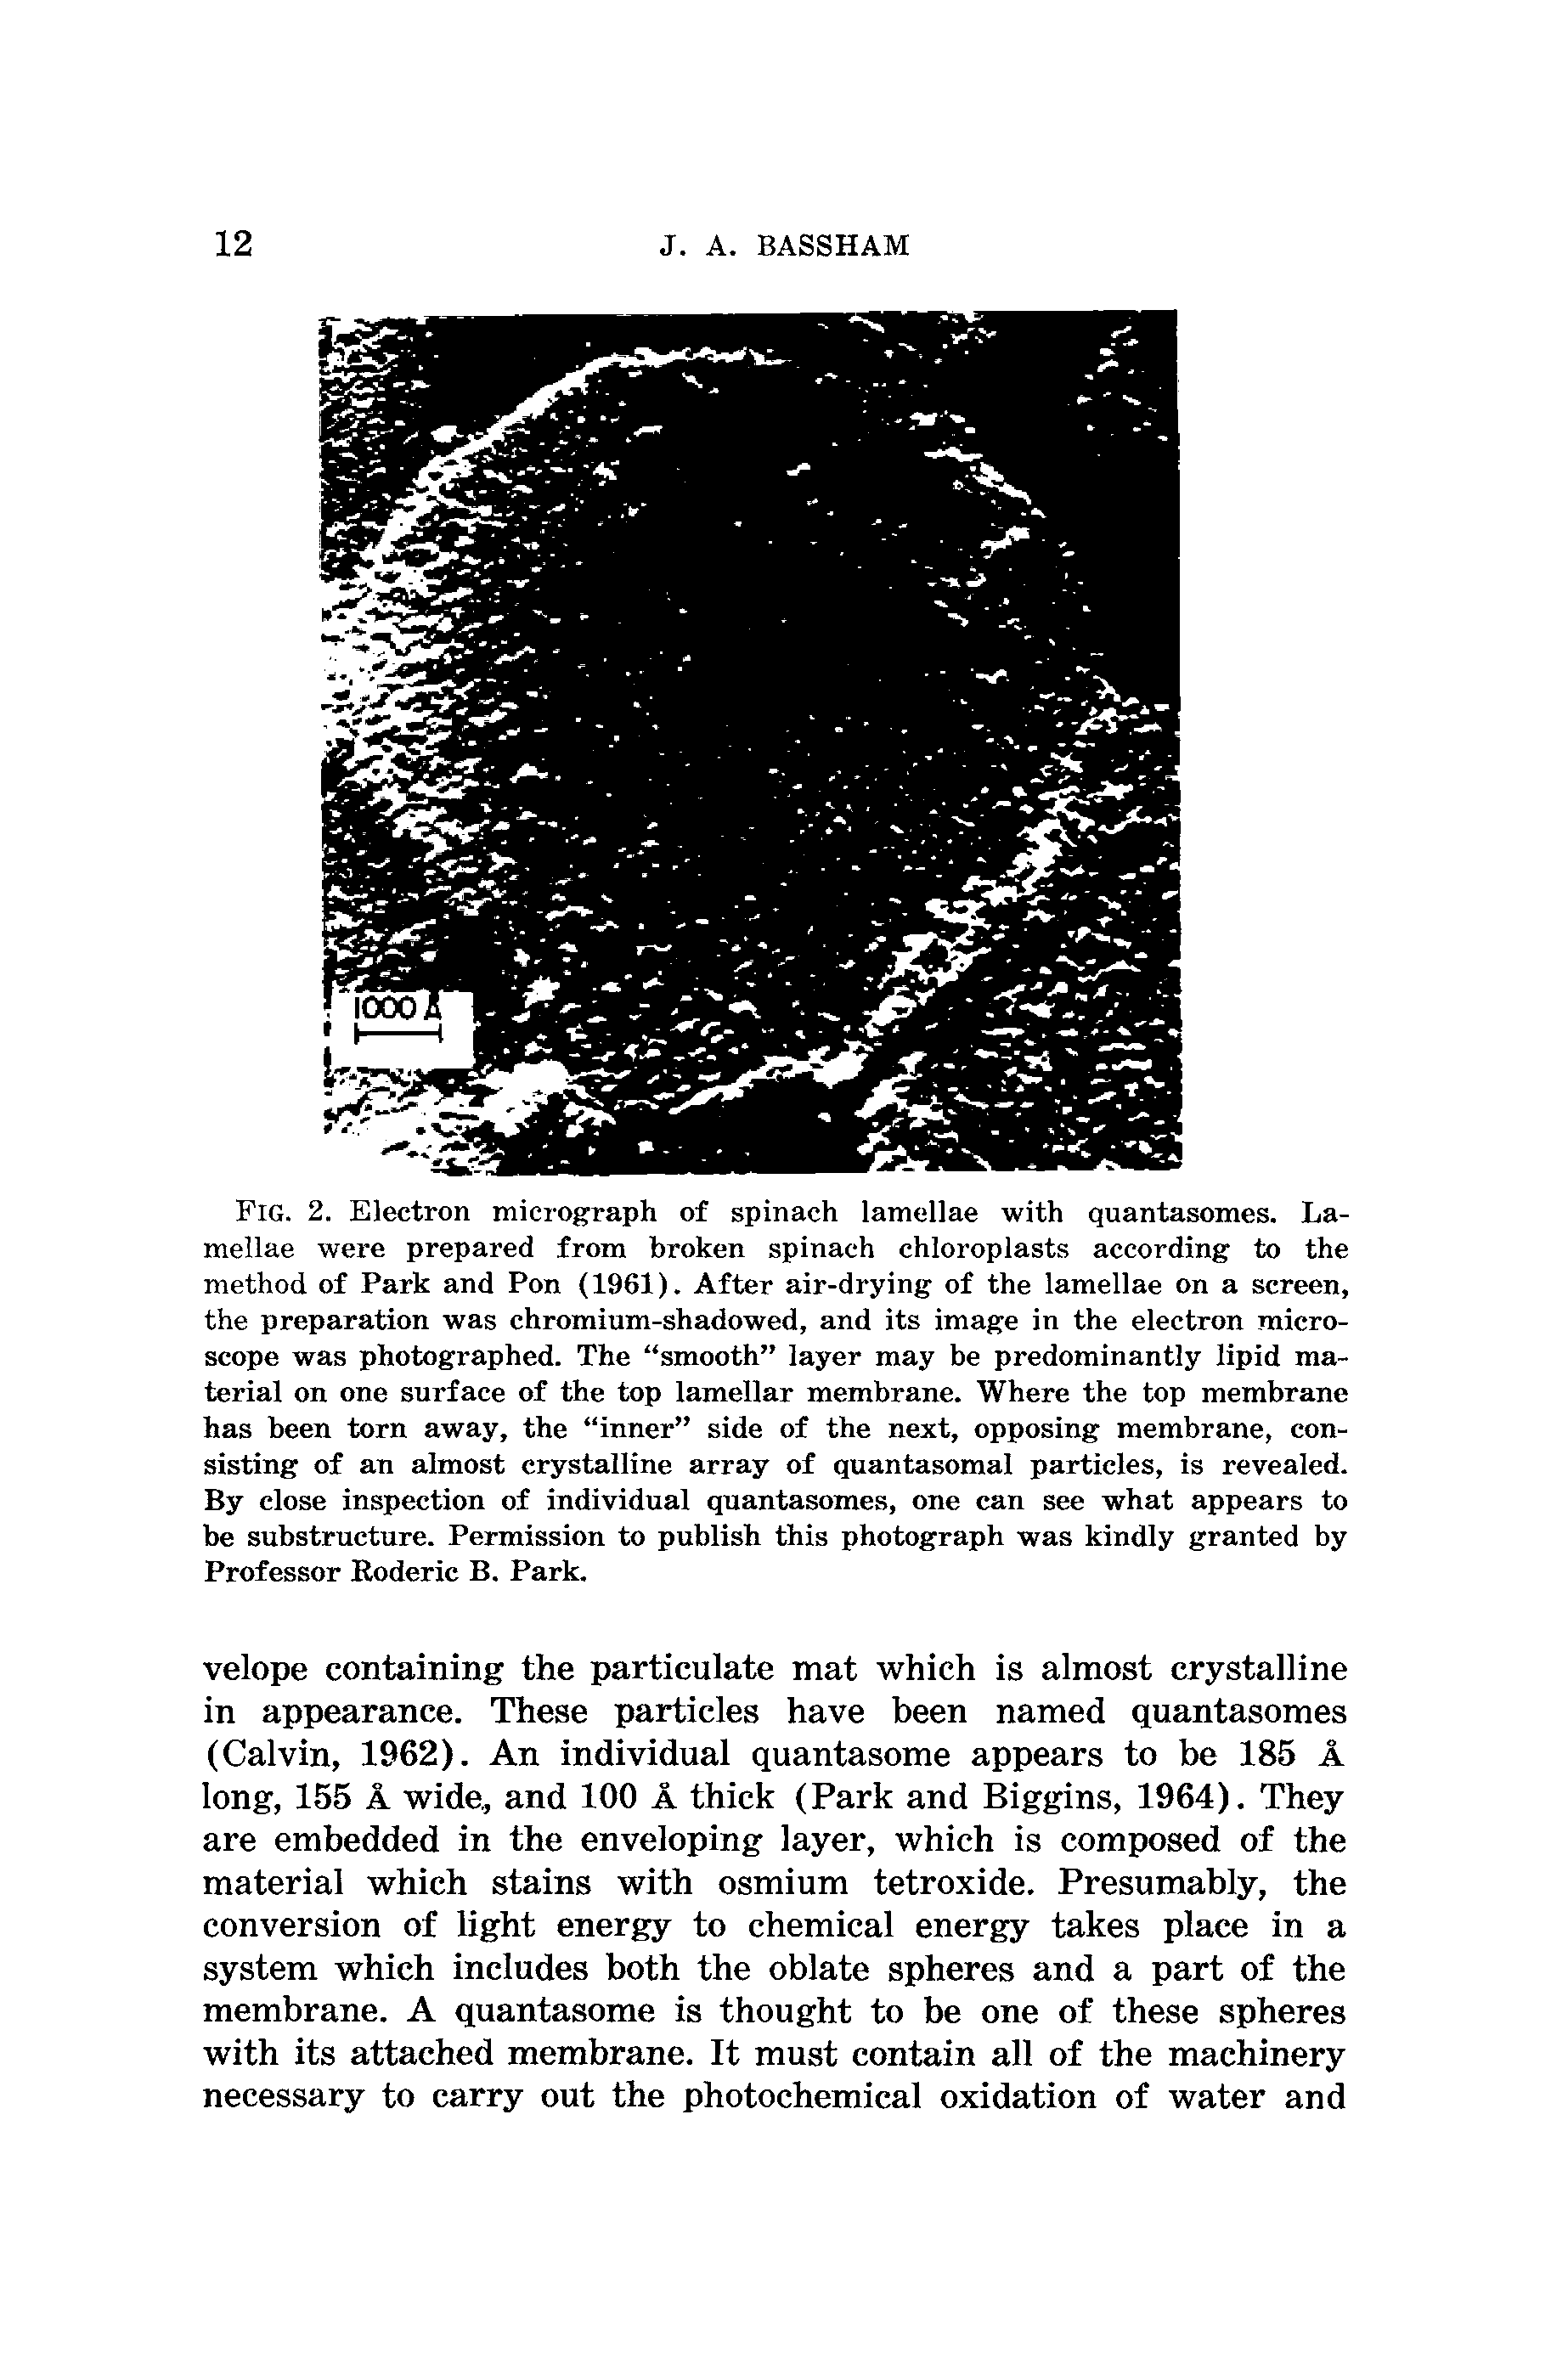 Fig. 2. Electron micrograph of spinach lamellae with quantasomes. Lamellae were prepared from broken spinach chloroplasts according to the method of Park and Pon (1961). After air-drying of the lamellae on a screen, the preparation was chromium-shadowed, and its image in the electron microscope was photographed. The smooth layer may be predominantly lipid material on one surface of the top lamellar membrane. Where the top membrane has been torn away, the inner side of the next, opposing membrane, consisting of an almost crystalline array of quantasomal particles, is revealed. By close inspection of individual quantasomes, one can see what appears to be substructure. Permission to publish this photograph was kindly granted by Professor Roderic B. Park.